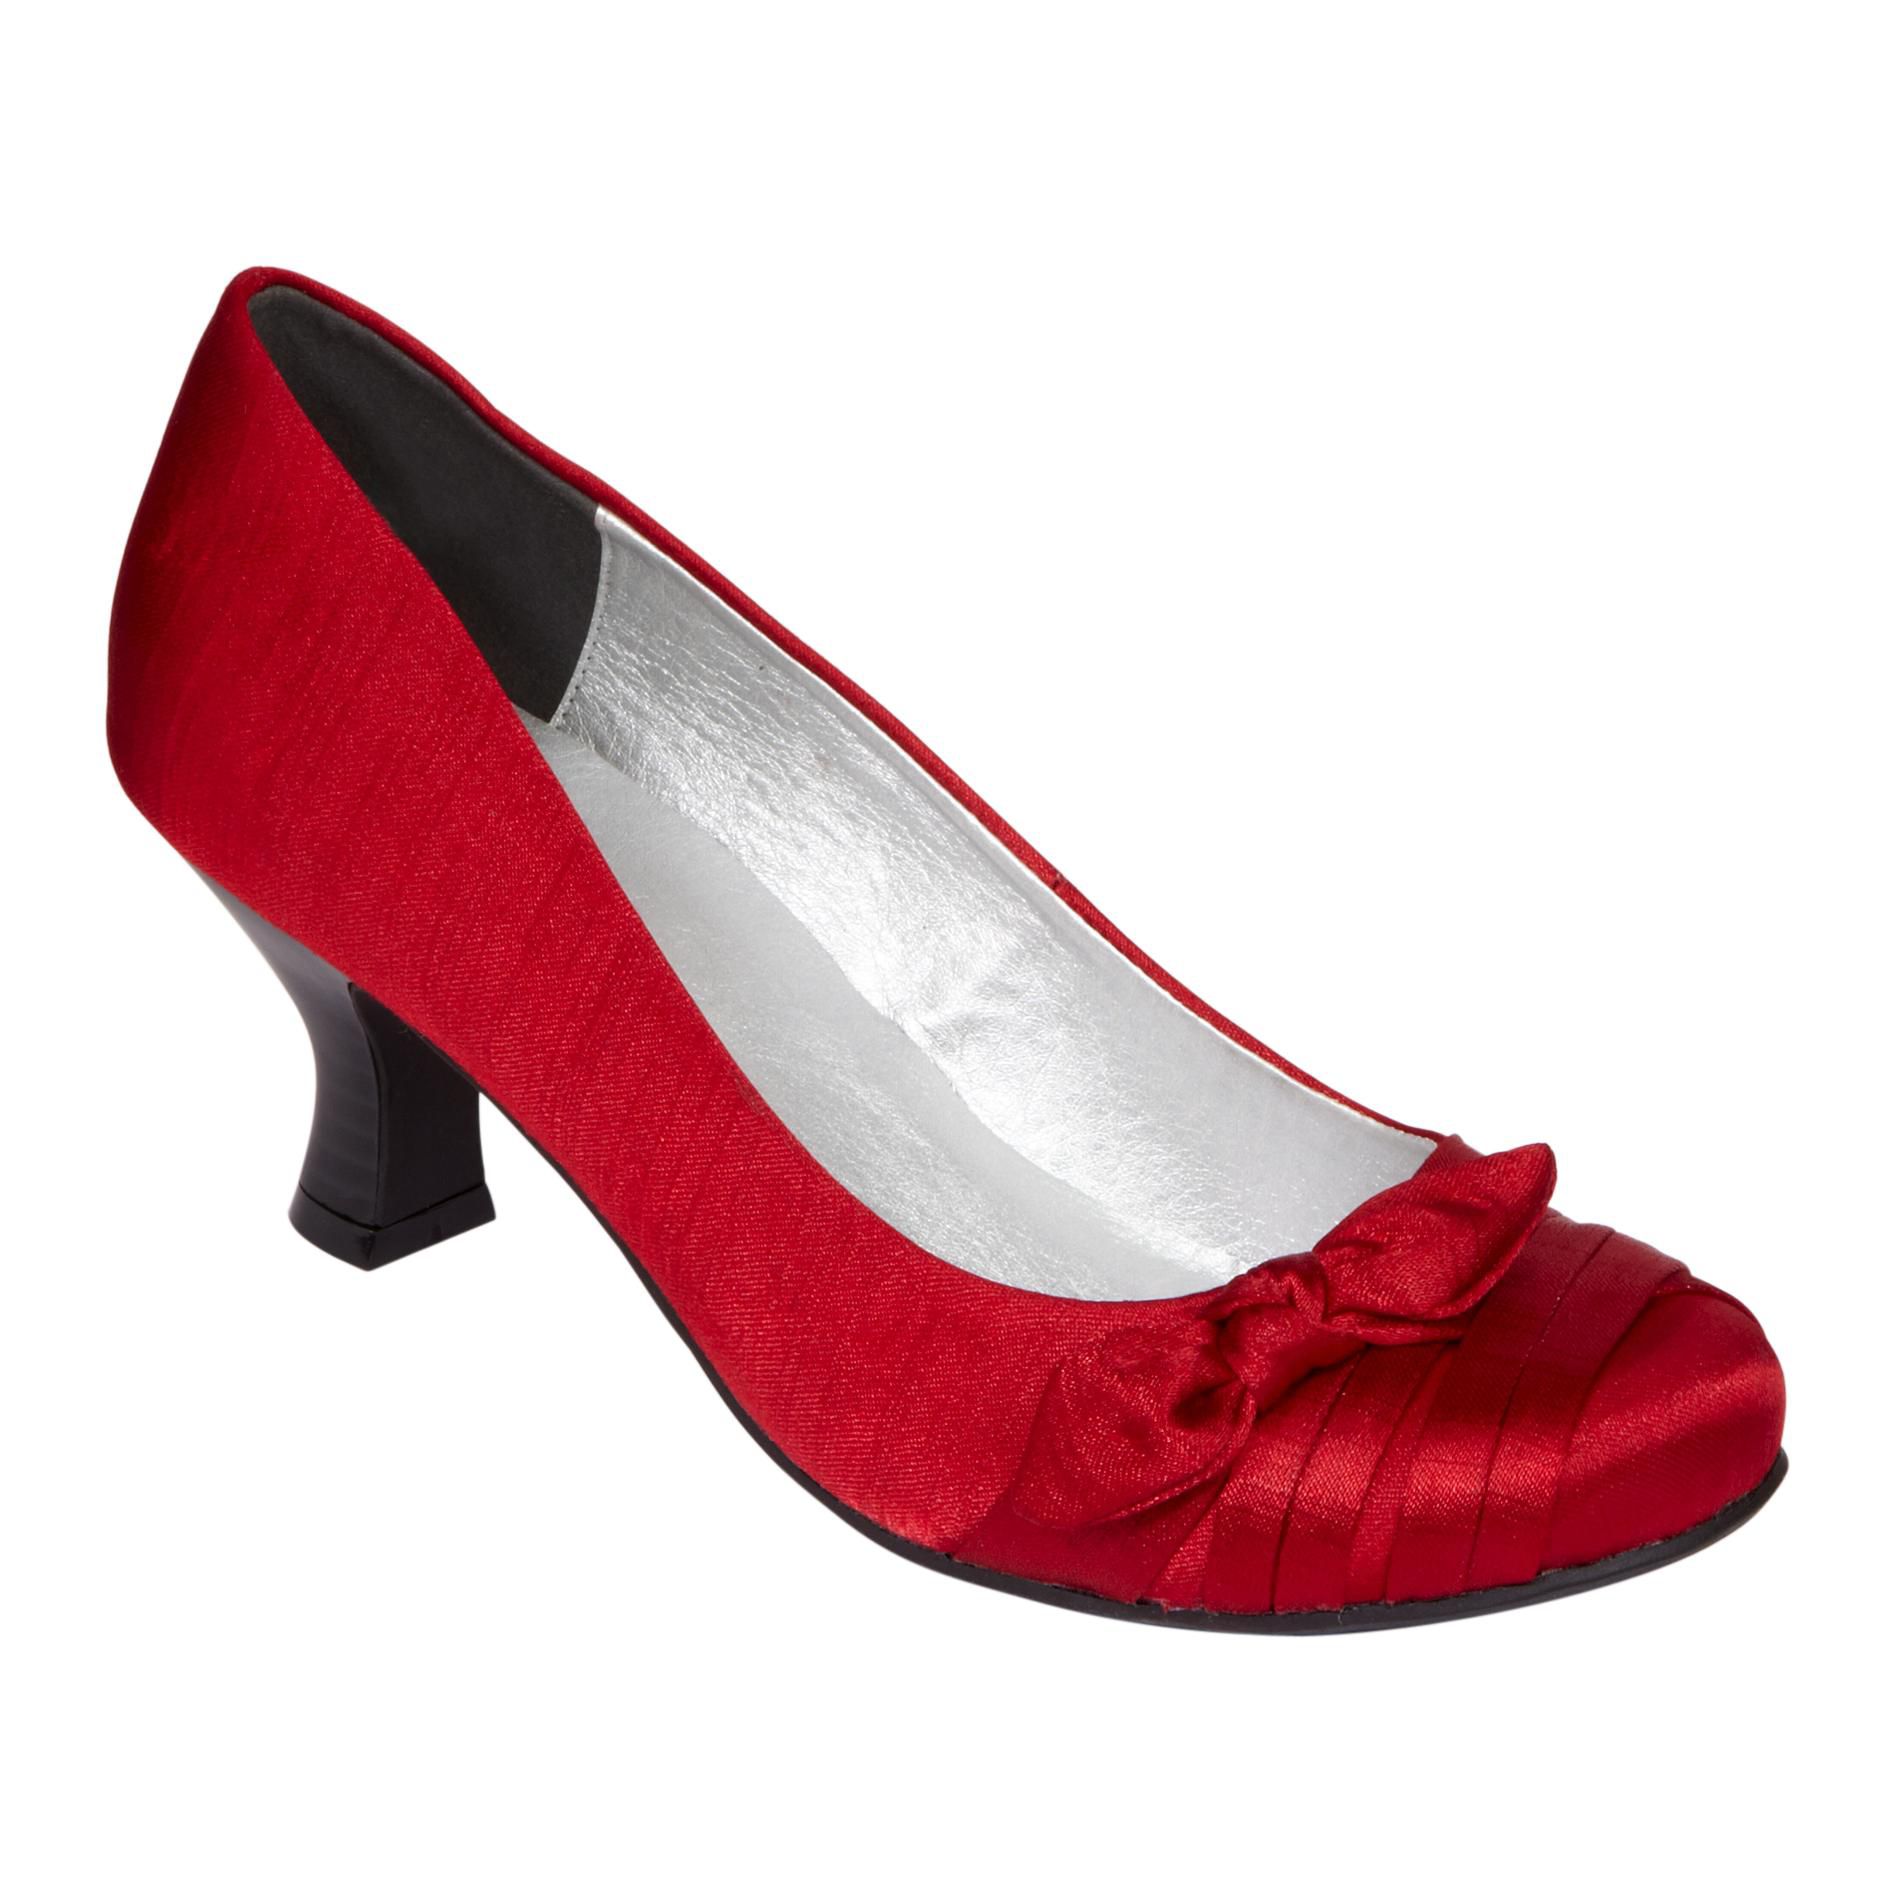 red dress shoes womens